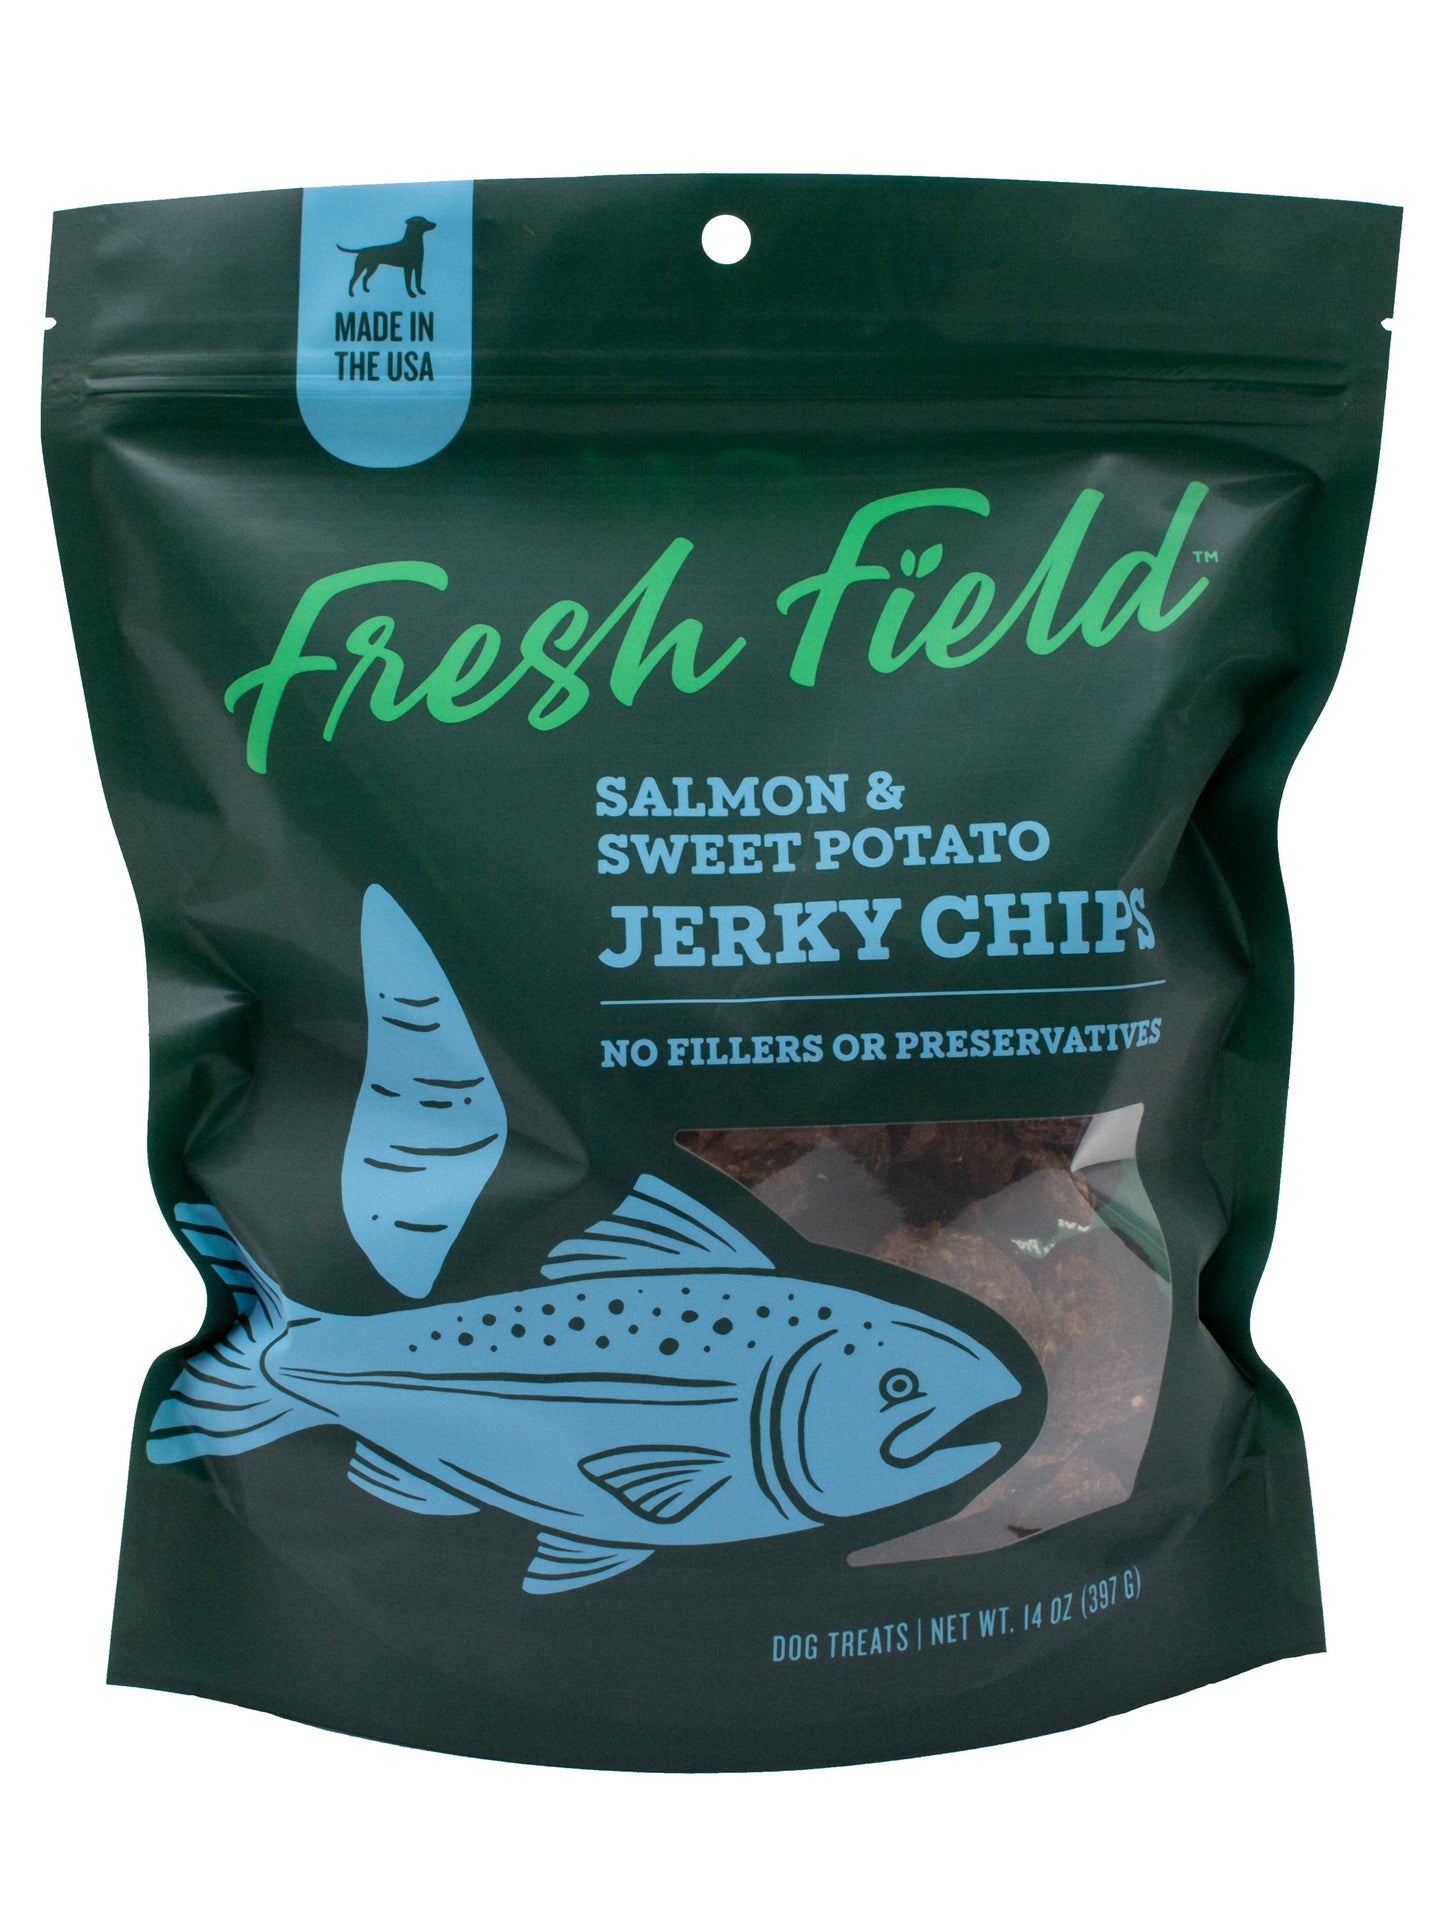 A photo of the front of the best 14 oz Salmon and Sweet Potato Jerky Chips Dog Treats from Colorado Pet Treats by Fresh Field. Colorado Pet Treats - All-Natural, All-American Dog Jerky, Jerky Chips, and Bones - Treat your furry friend to our delicious and healthy pet treats made with only the finest ingredients sourced in the USA. The best crunchy and savory jerky chips made with all-natural ingredients and baked to perfection.